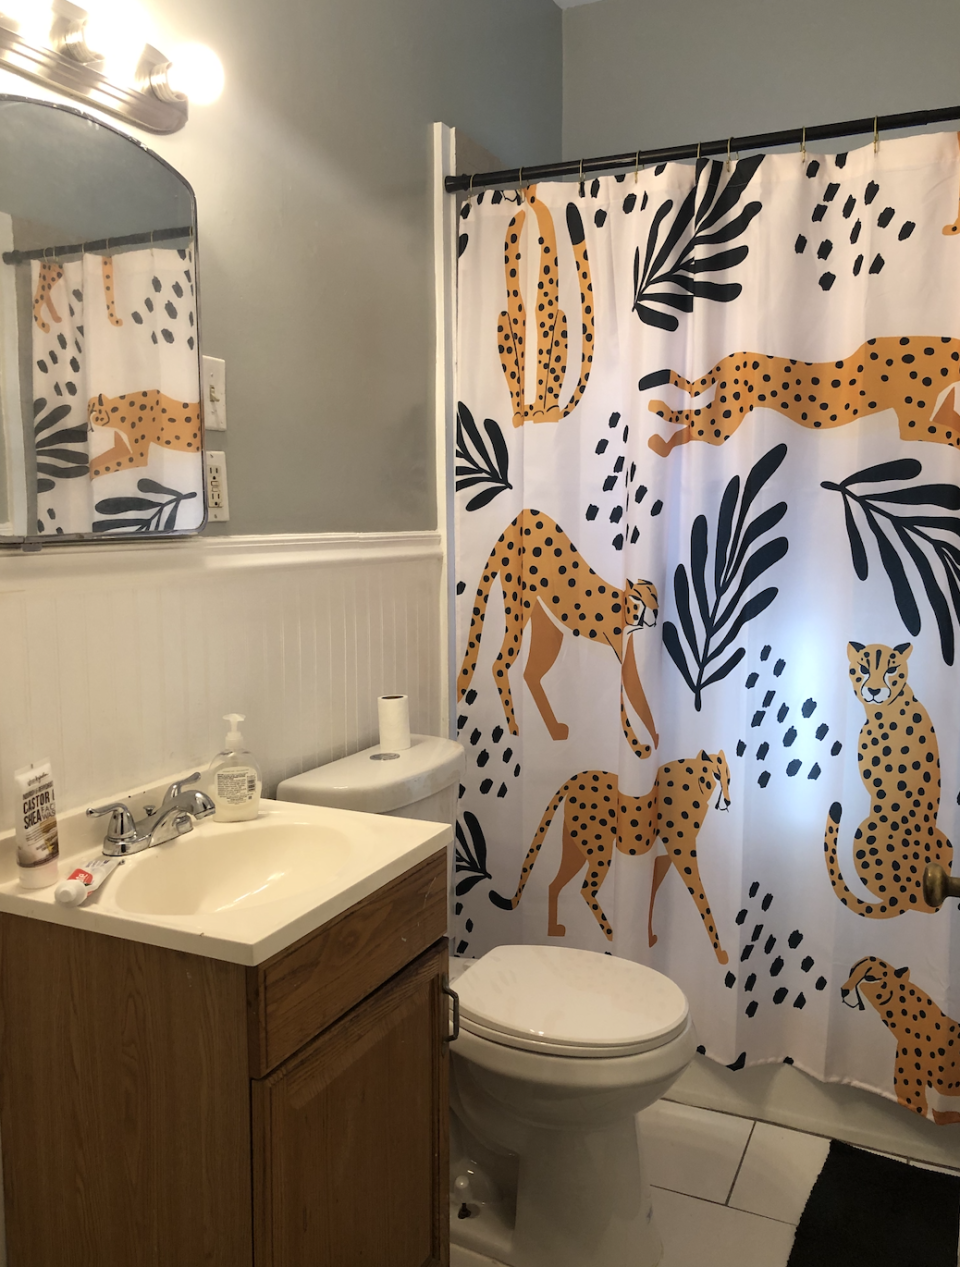 A bathroom with a wooden vanity, sink, toilet, and a shower curtain featuring various cheetah illustrations